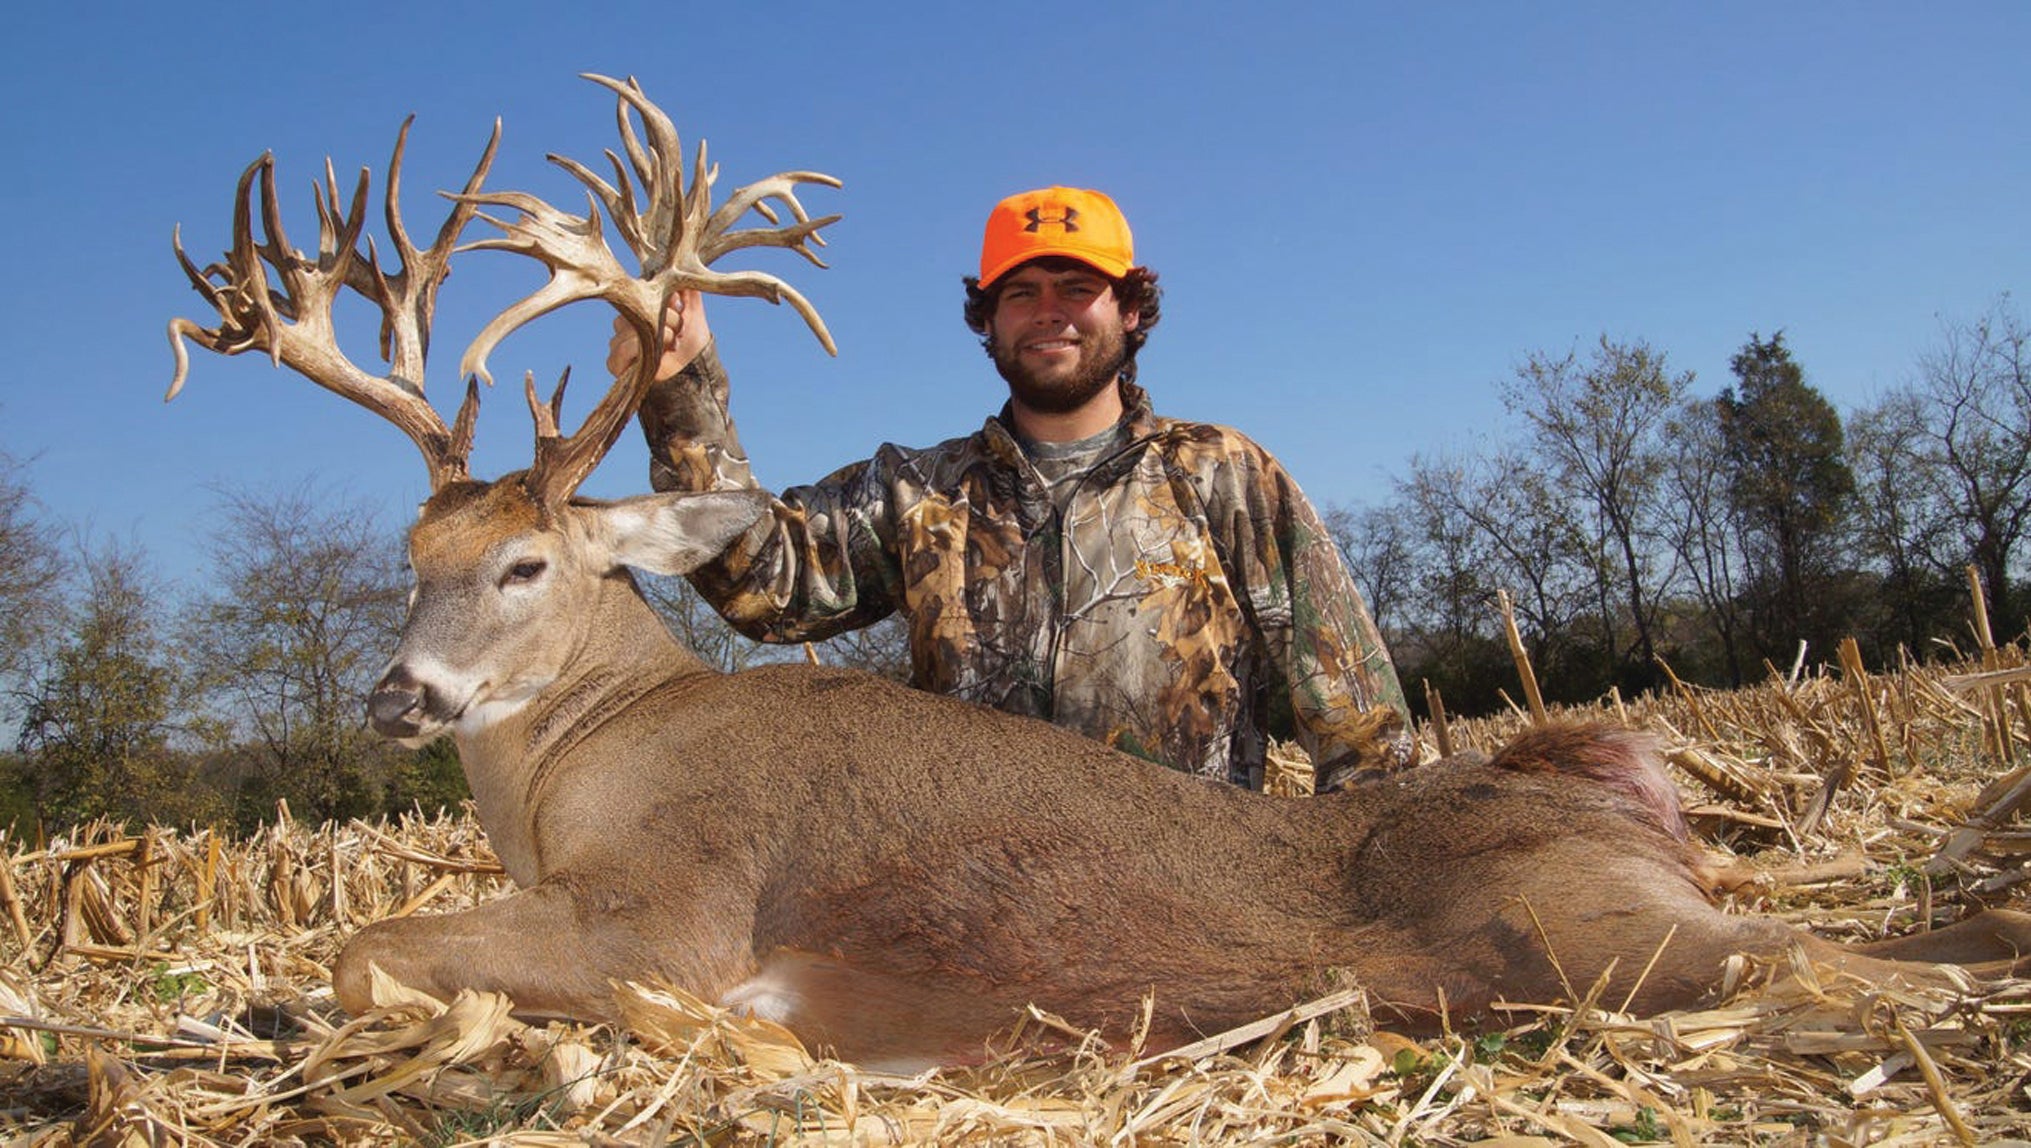 East Tennessee Outdoors... World record whitetail deer www